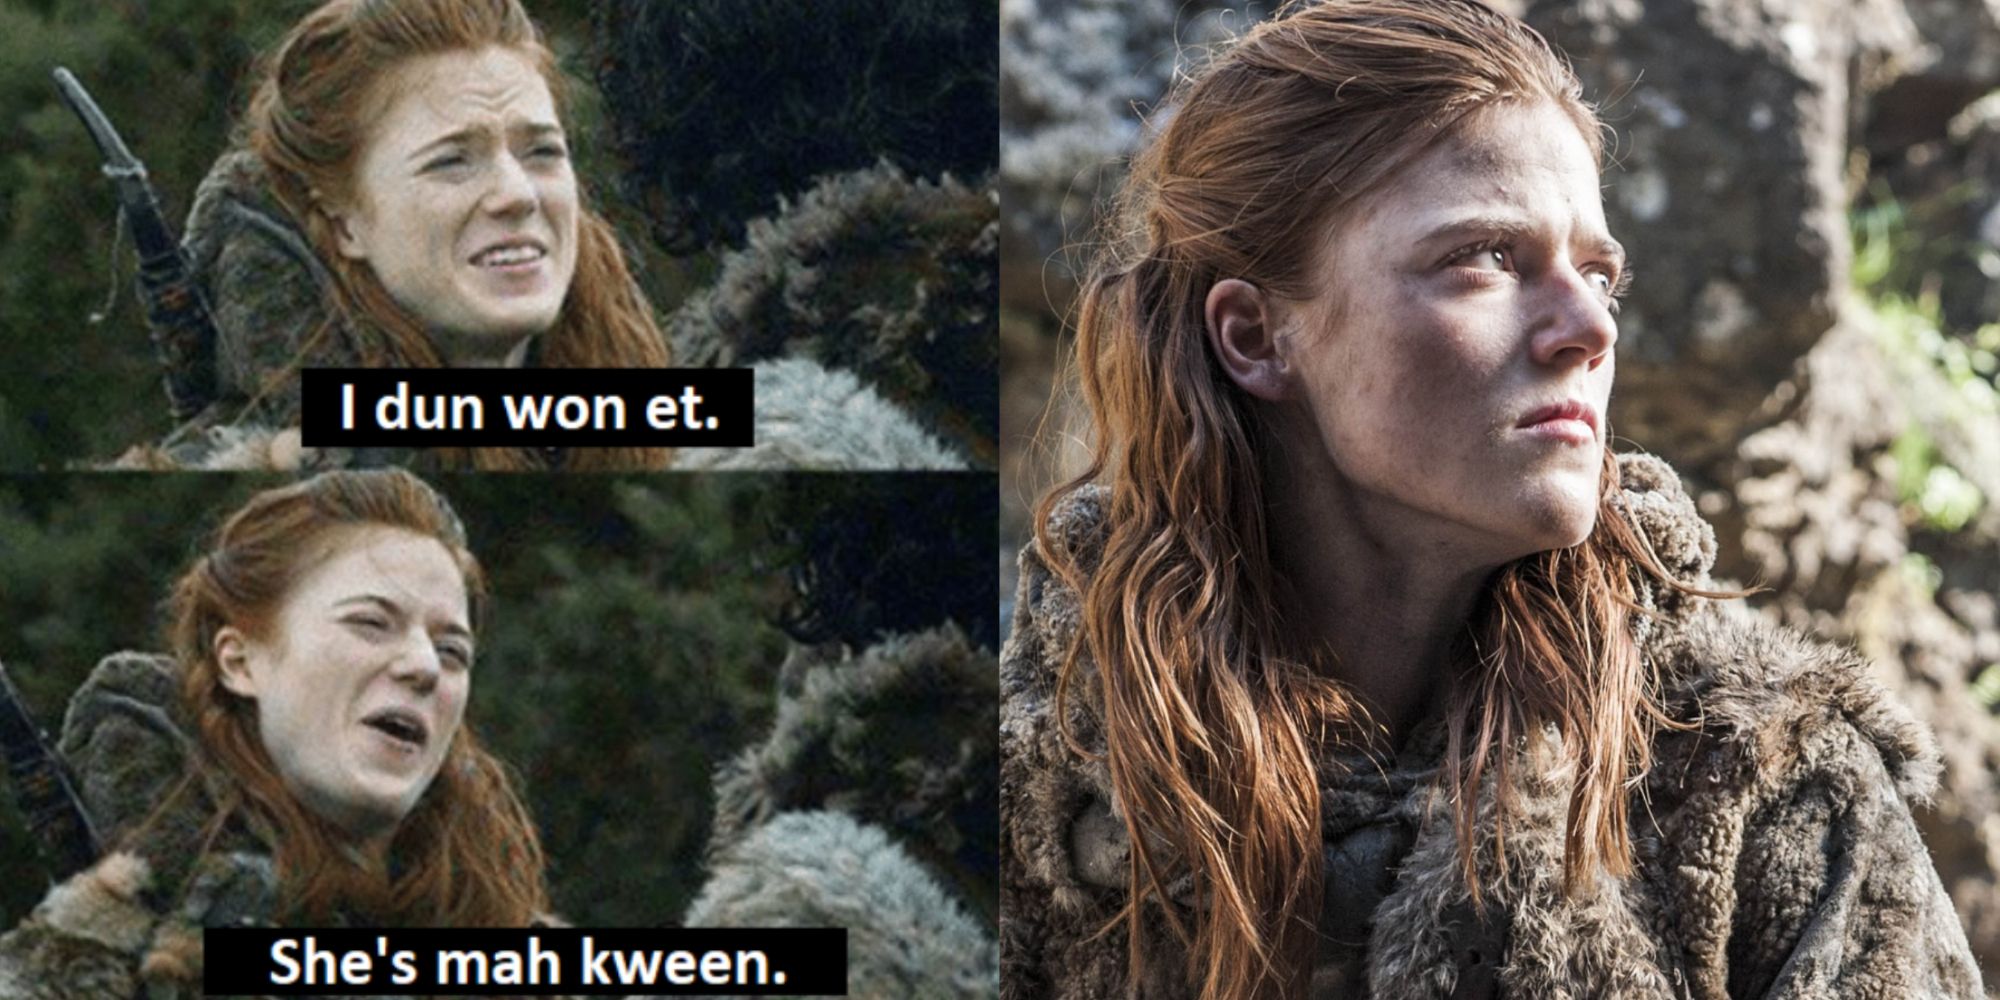 Split feature image showing Ygritte's meme and Ygritte character from Game of Thrones.